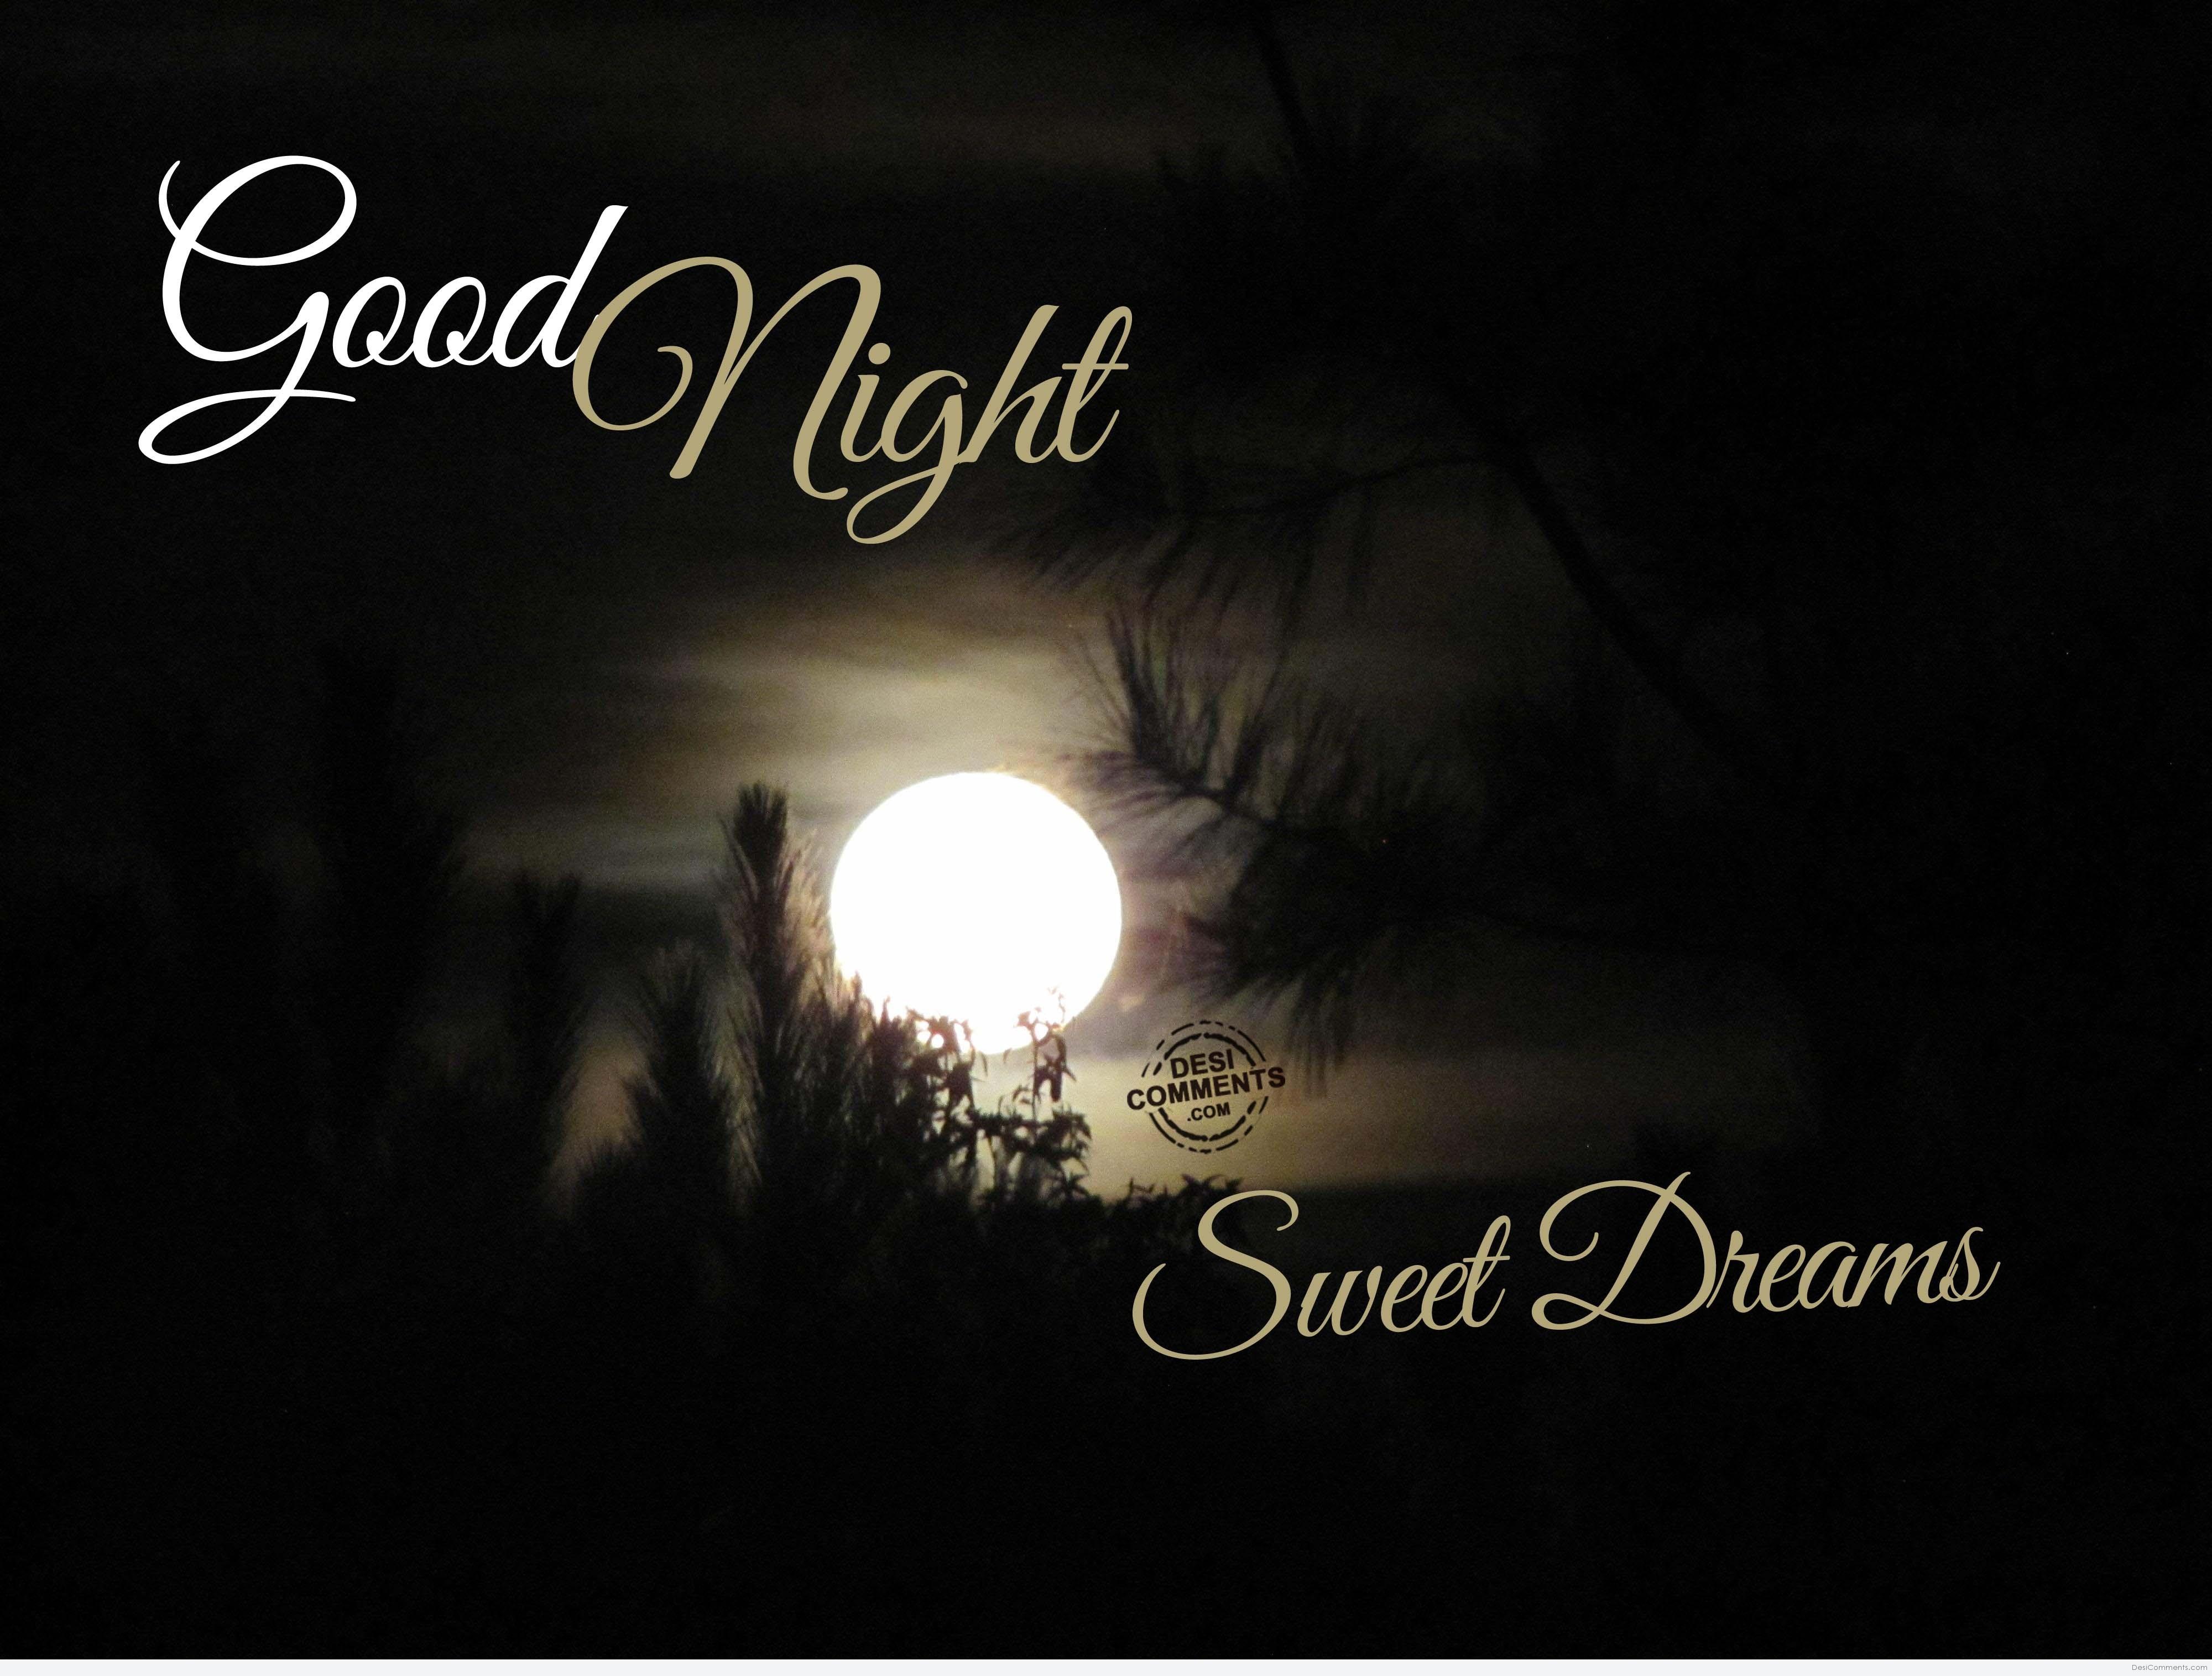 Good Morning and Good Night SMS, Morning Wishes, Good Night Wishes